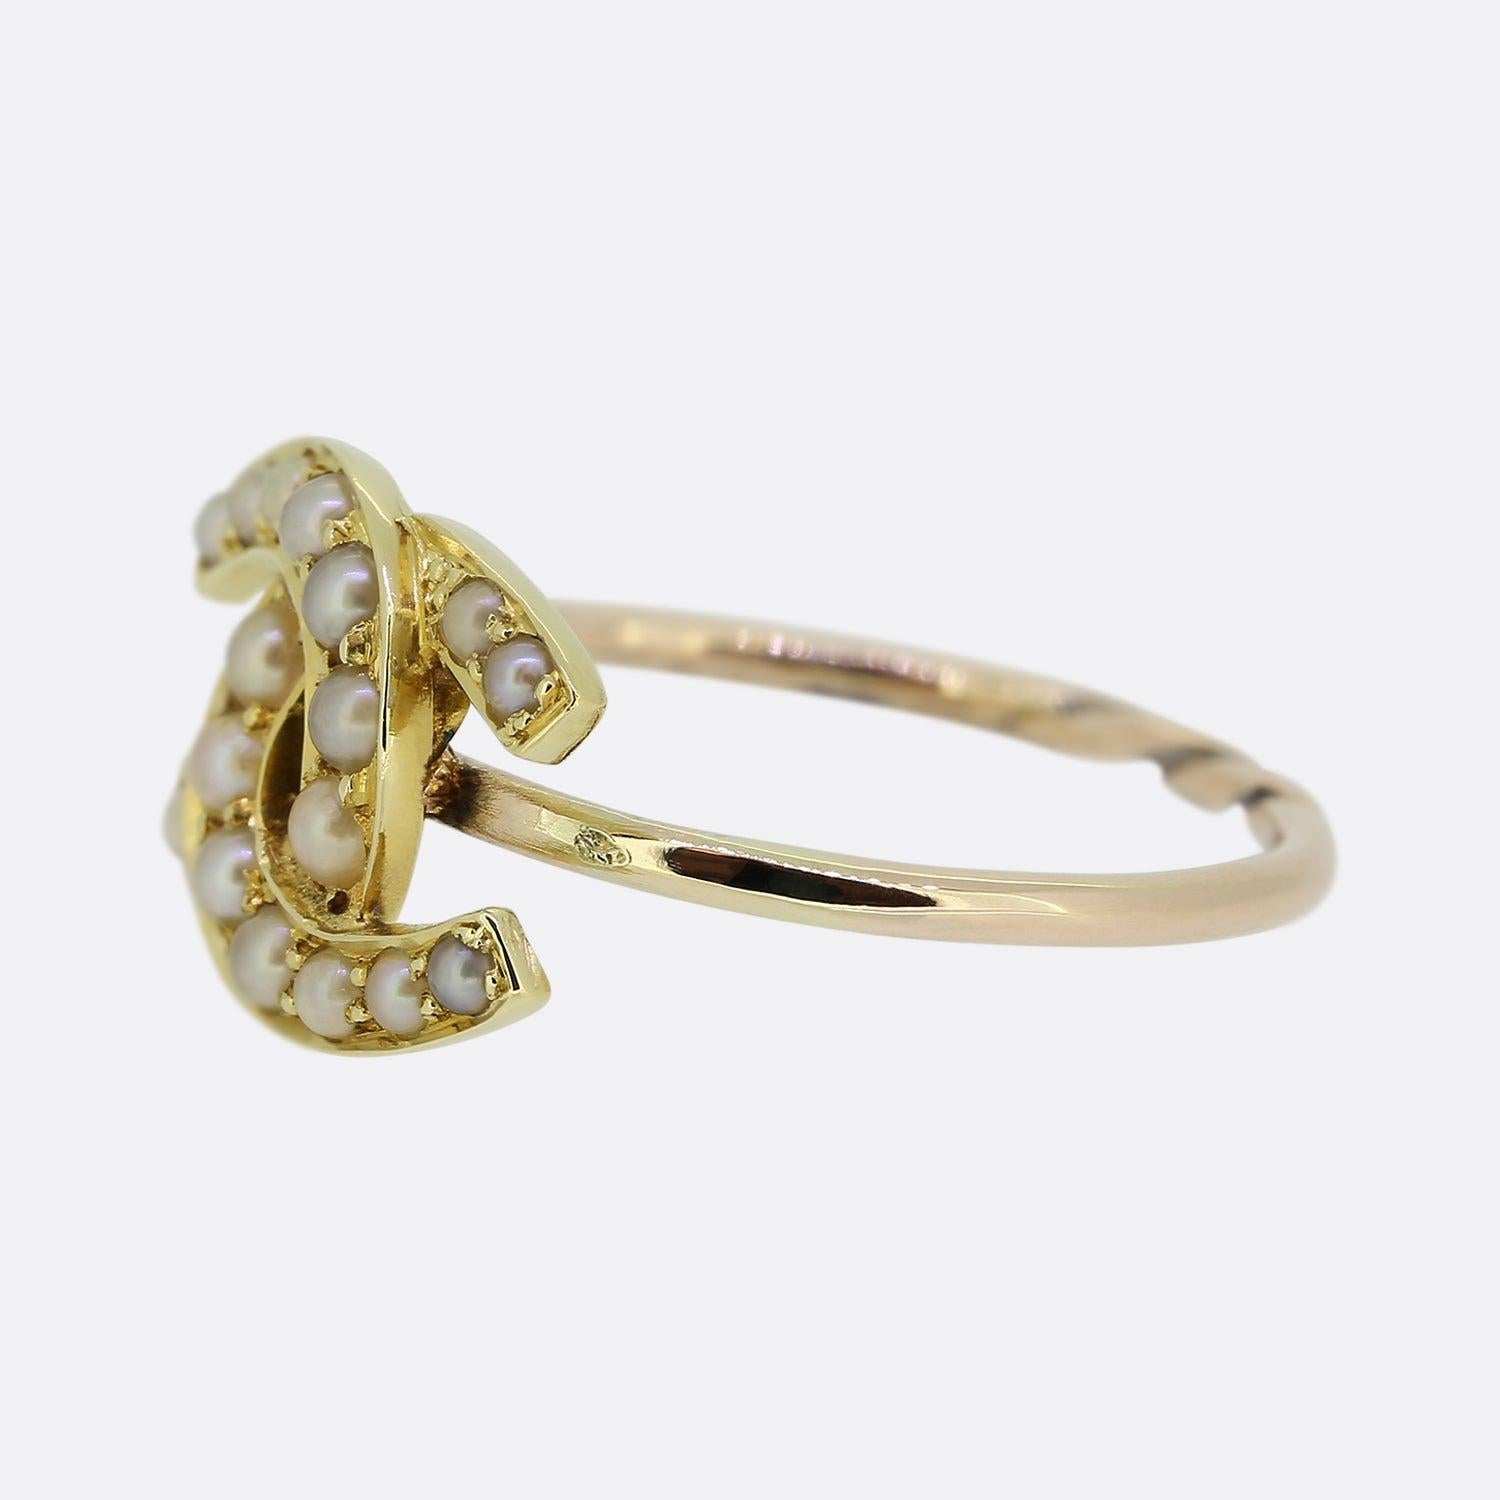 Here we have a charming Victorian double horseshoe ring. The face has been crafted into two interlocking horseshoes pervaded with a single row of round seed pearls which sit atop a rose gold band. 

This piece started life as an antique stick pin